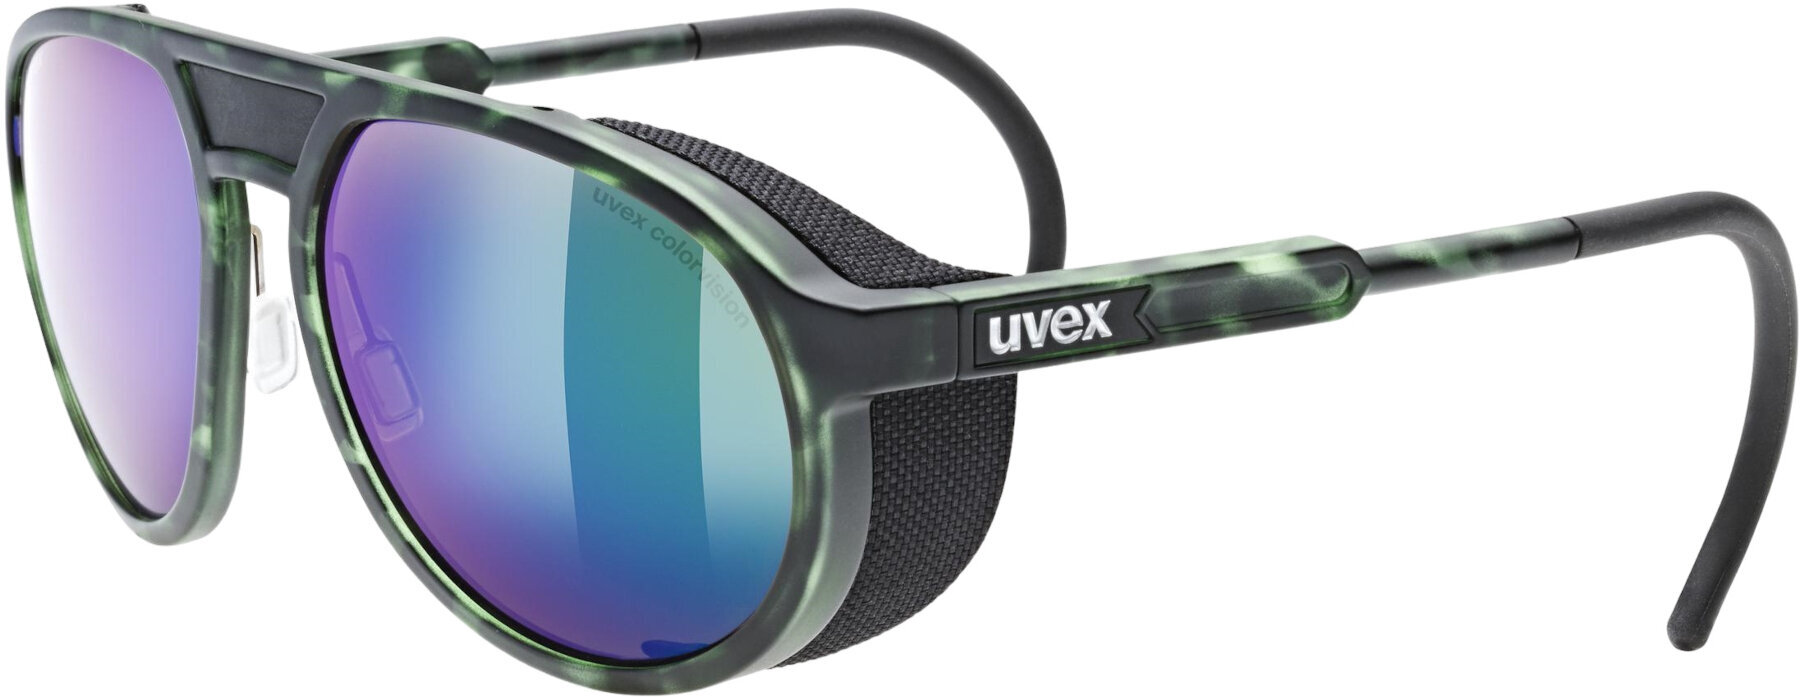 Outdoor Sonnenbrille UVEX MTN Classic CV Green Mat/Tortoise/Colorvision Mirror Green Outdoor Sonnenbrille